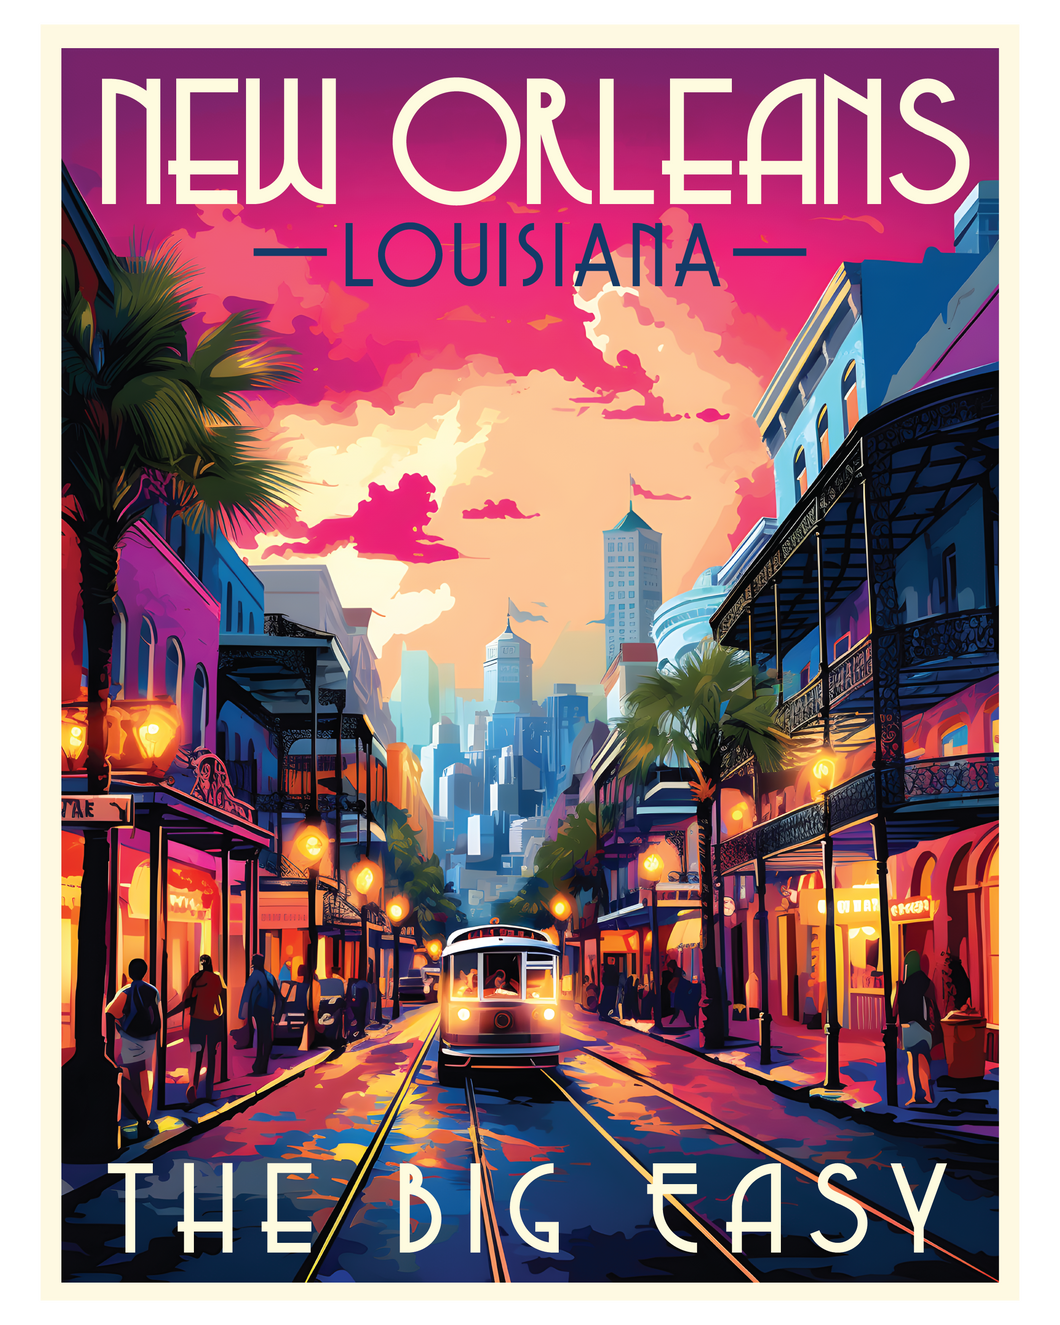 Exclusive New Orleans Louisiana Collectible - Vintage Travel Poster Art